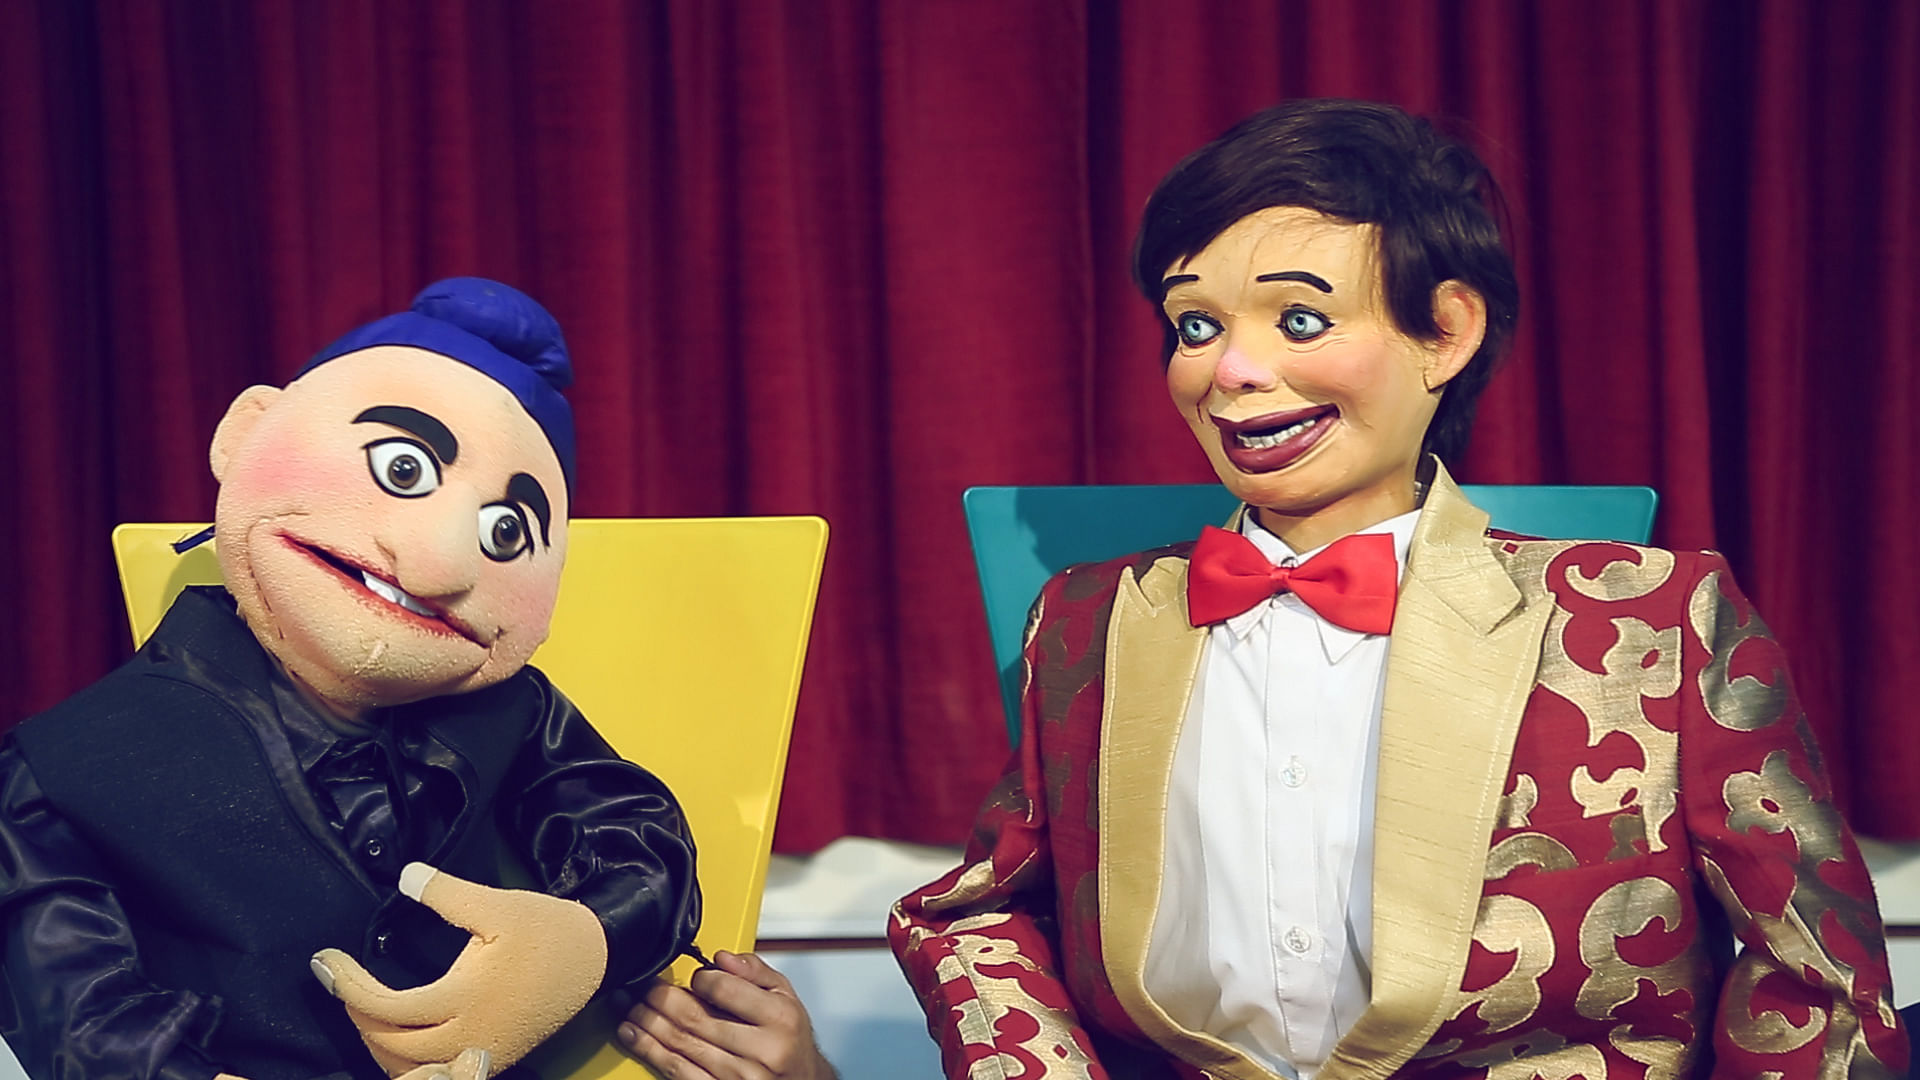 Ardhawatarao (right) is a 100-year-old puppet. (Photo: <b>The Quint</b>)